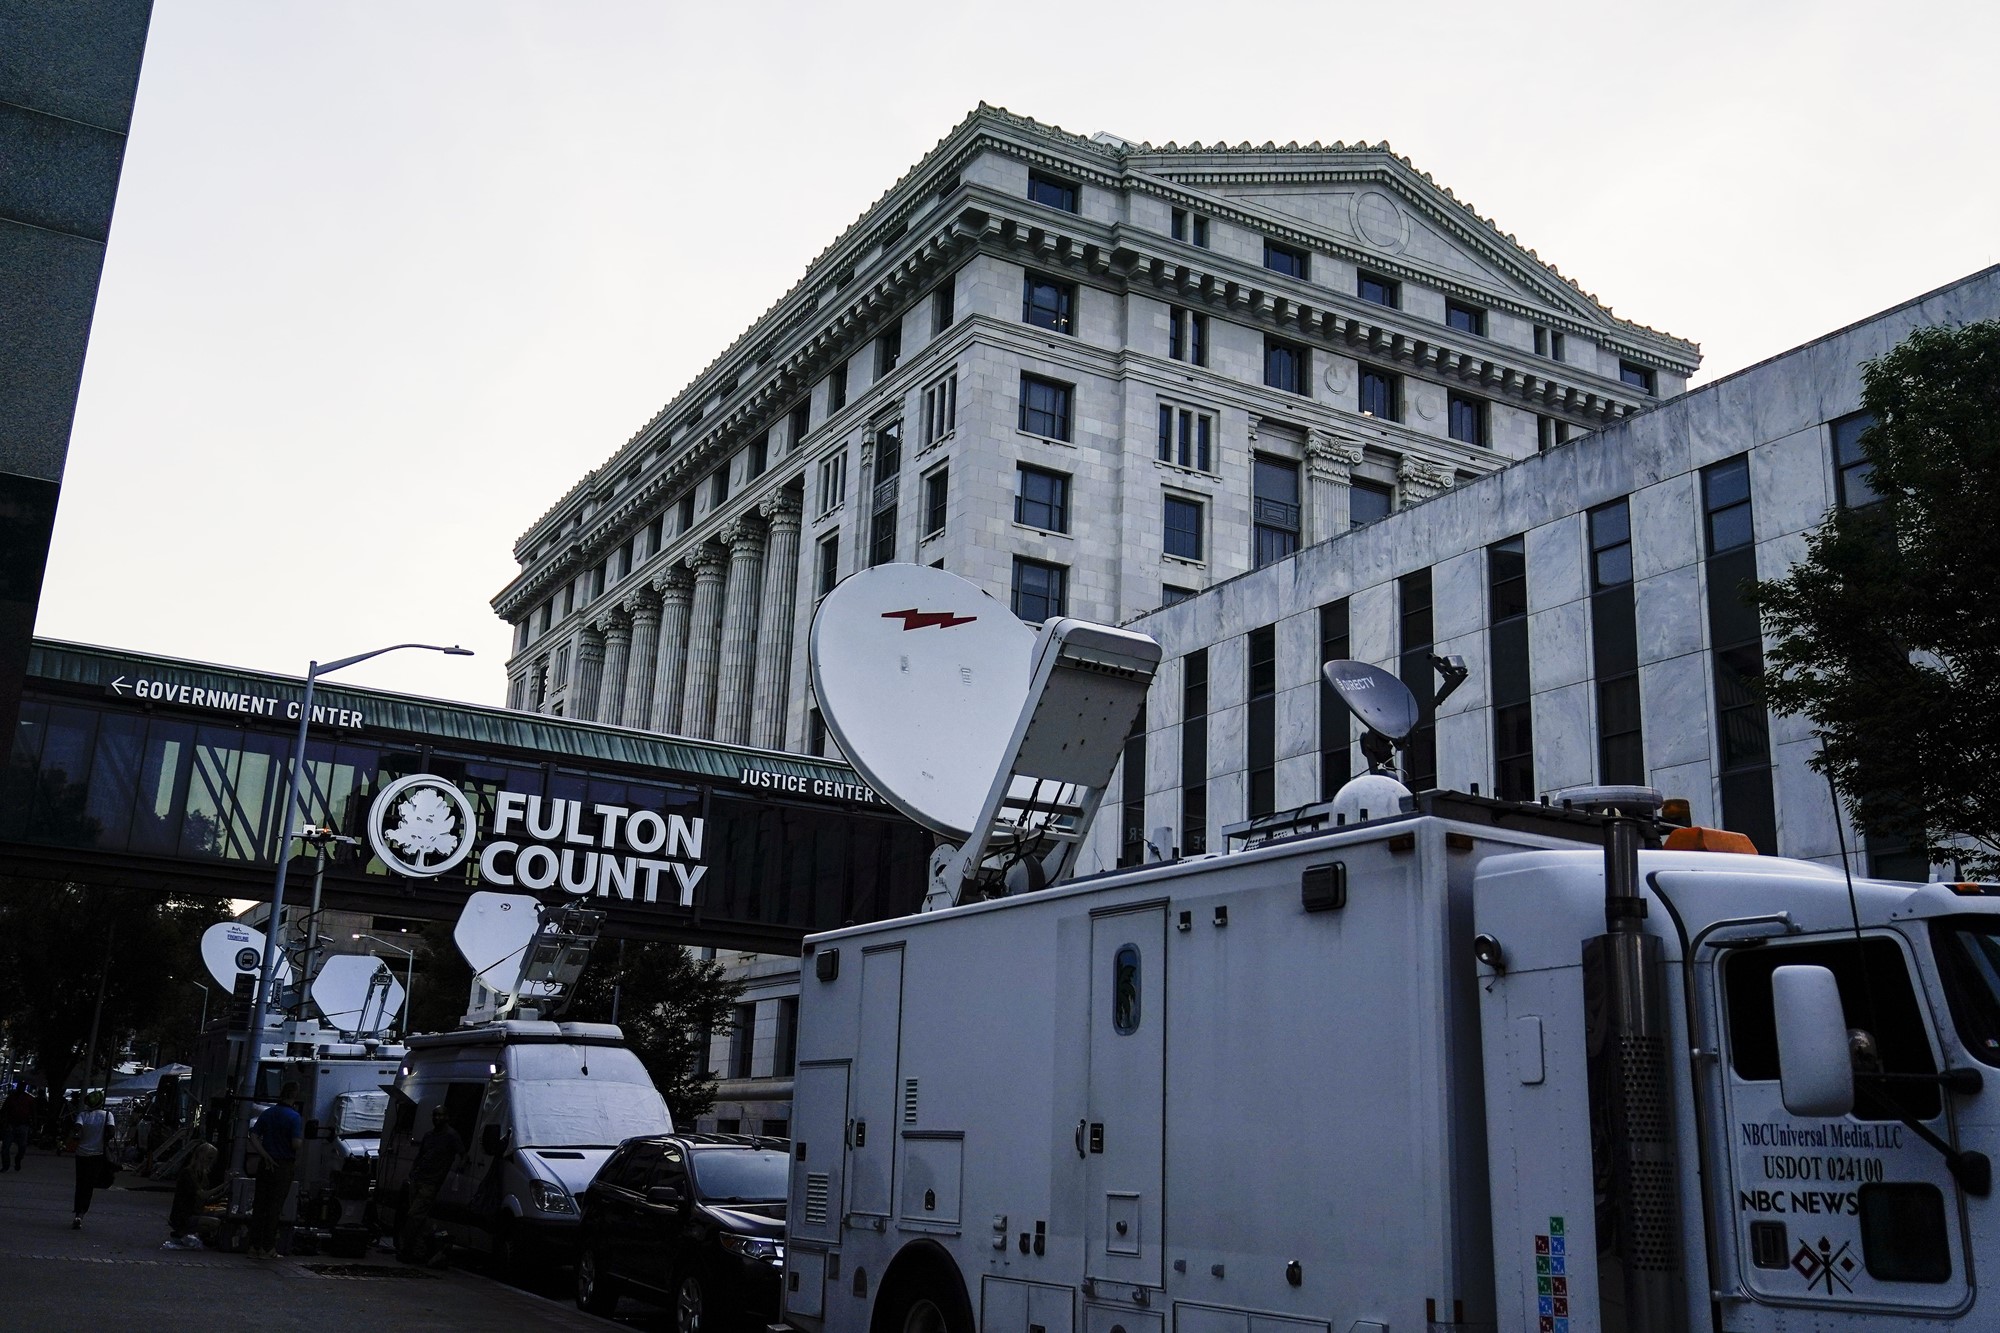 TV broadcast trucks lined up outside a large courthouse building